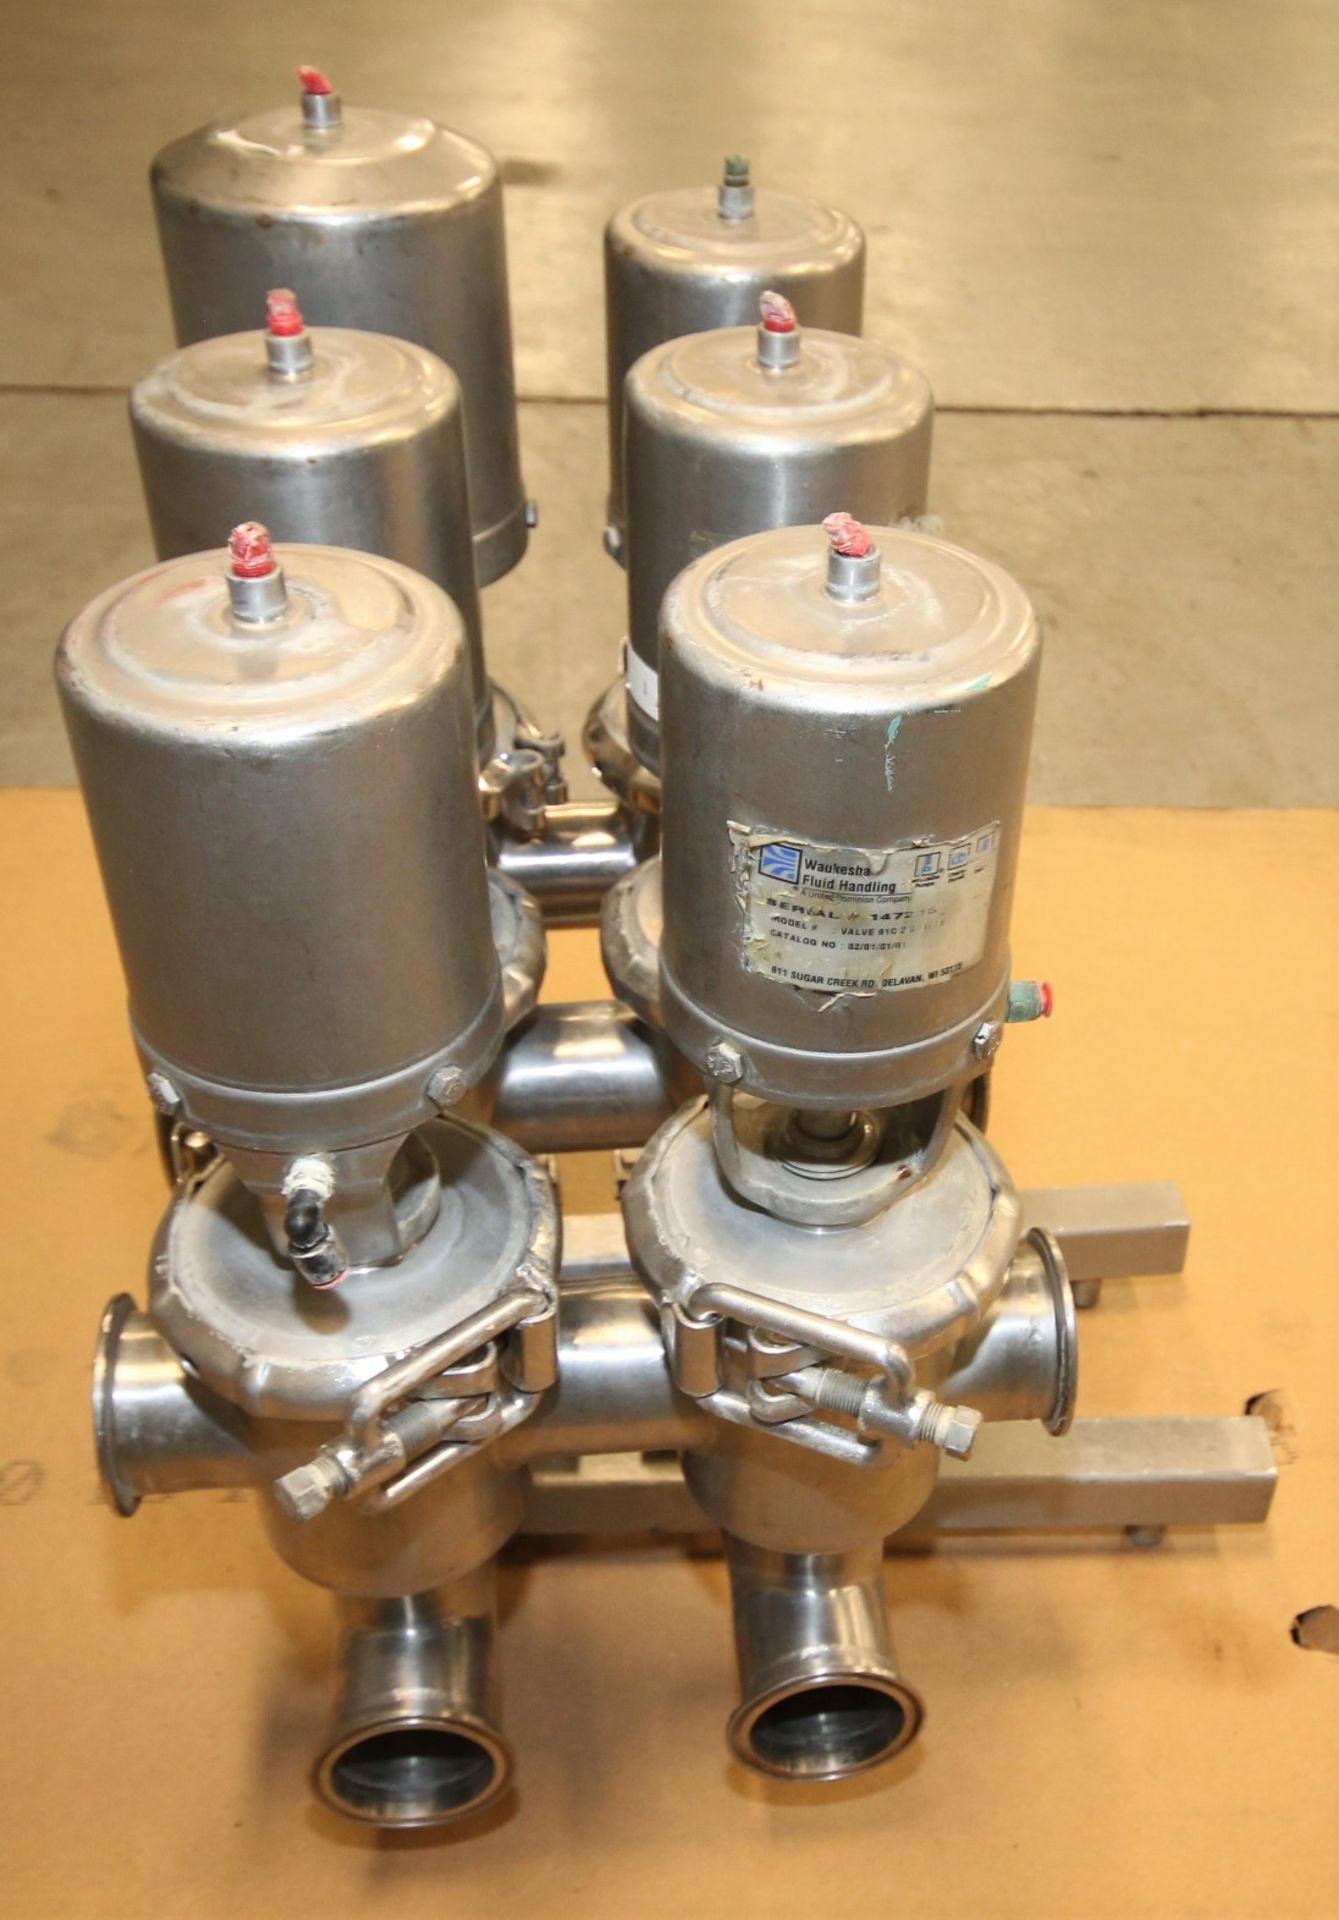 6-Valve WCB 2-1/2" S/S Air Valve Manifold / Cluster with Model 61C Valves - Image 4 of 4